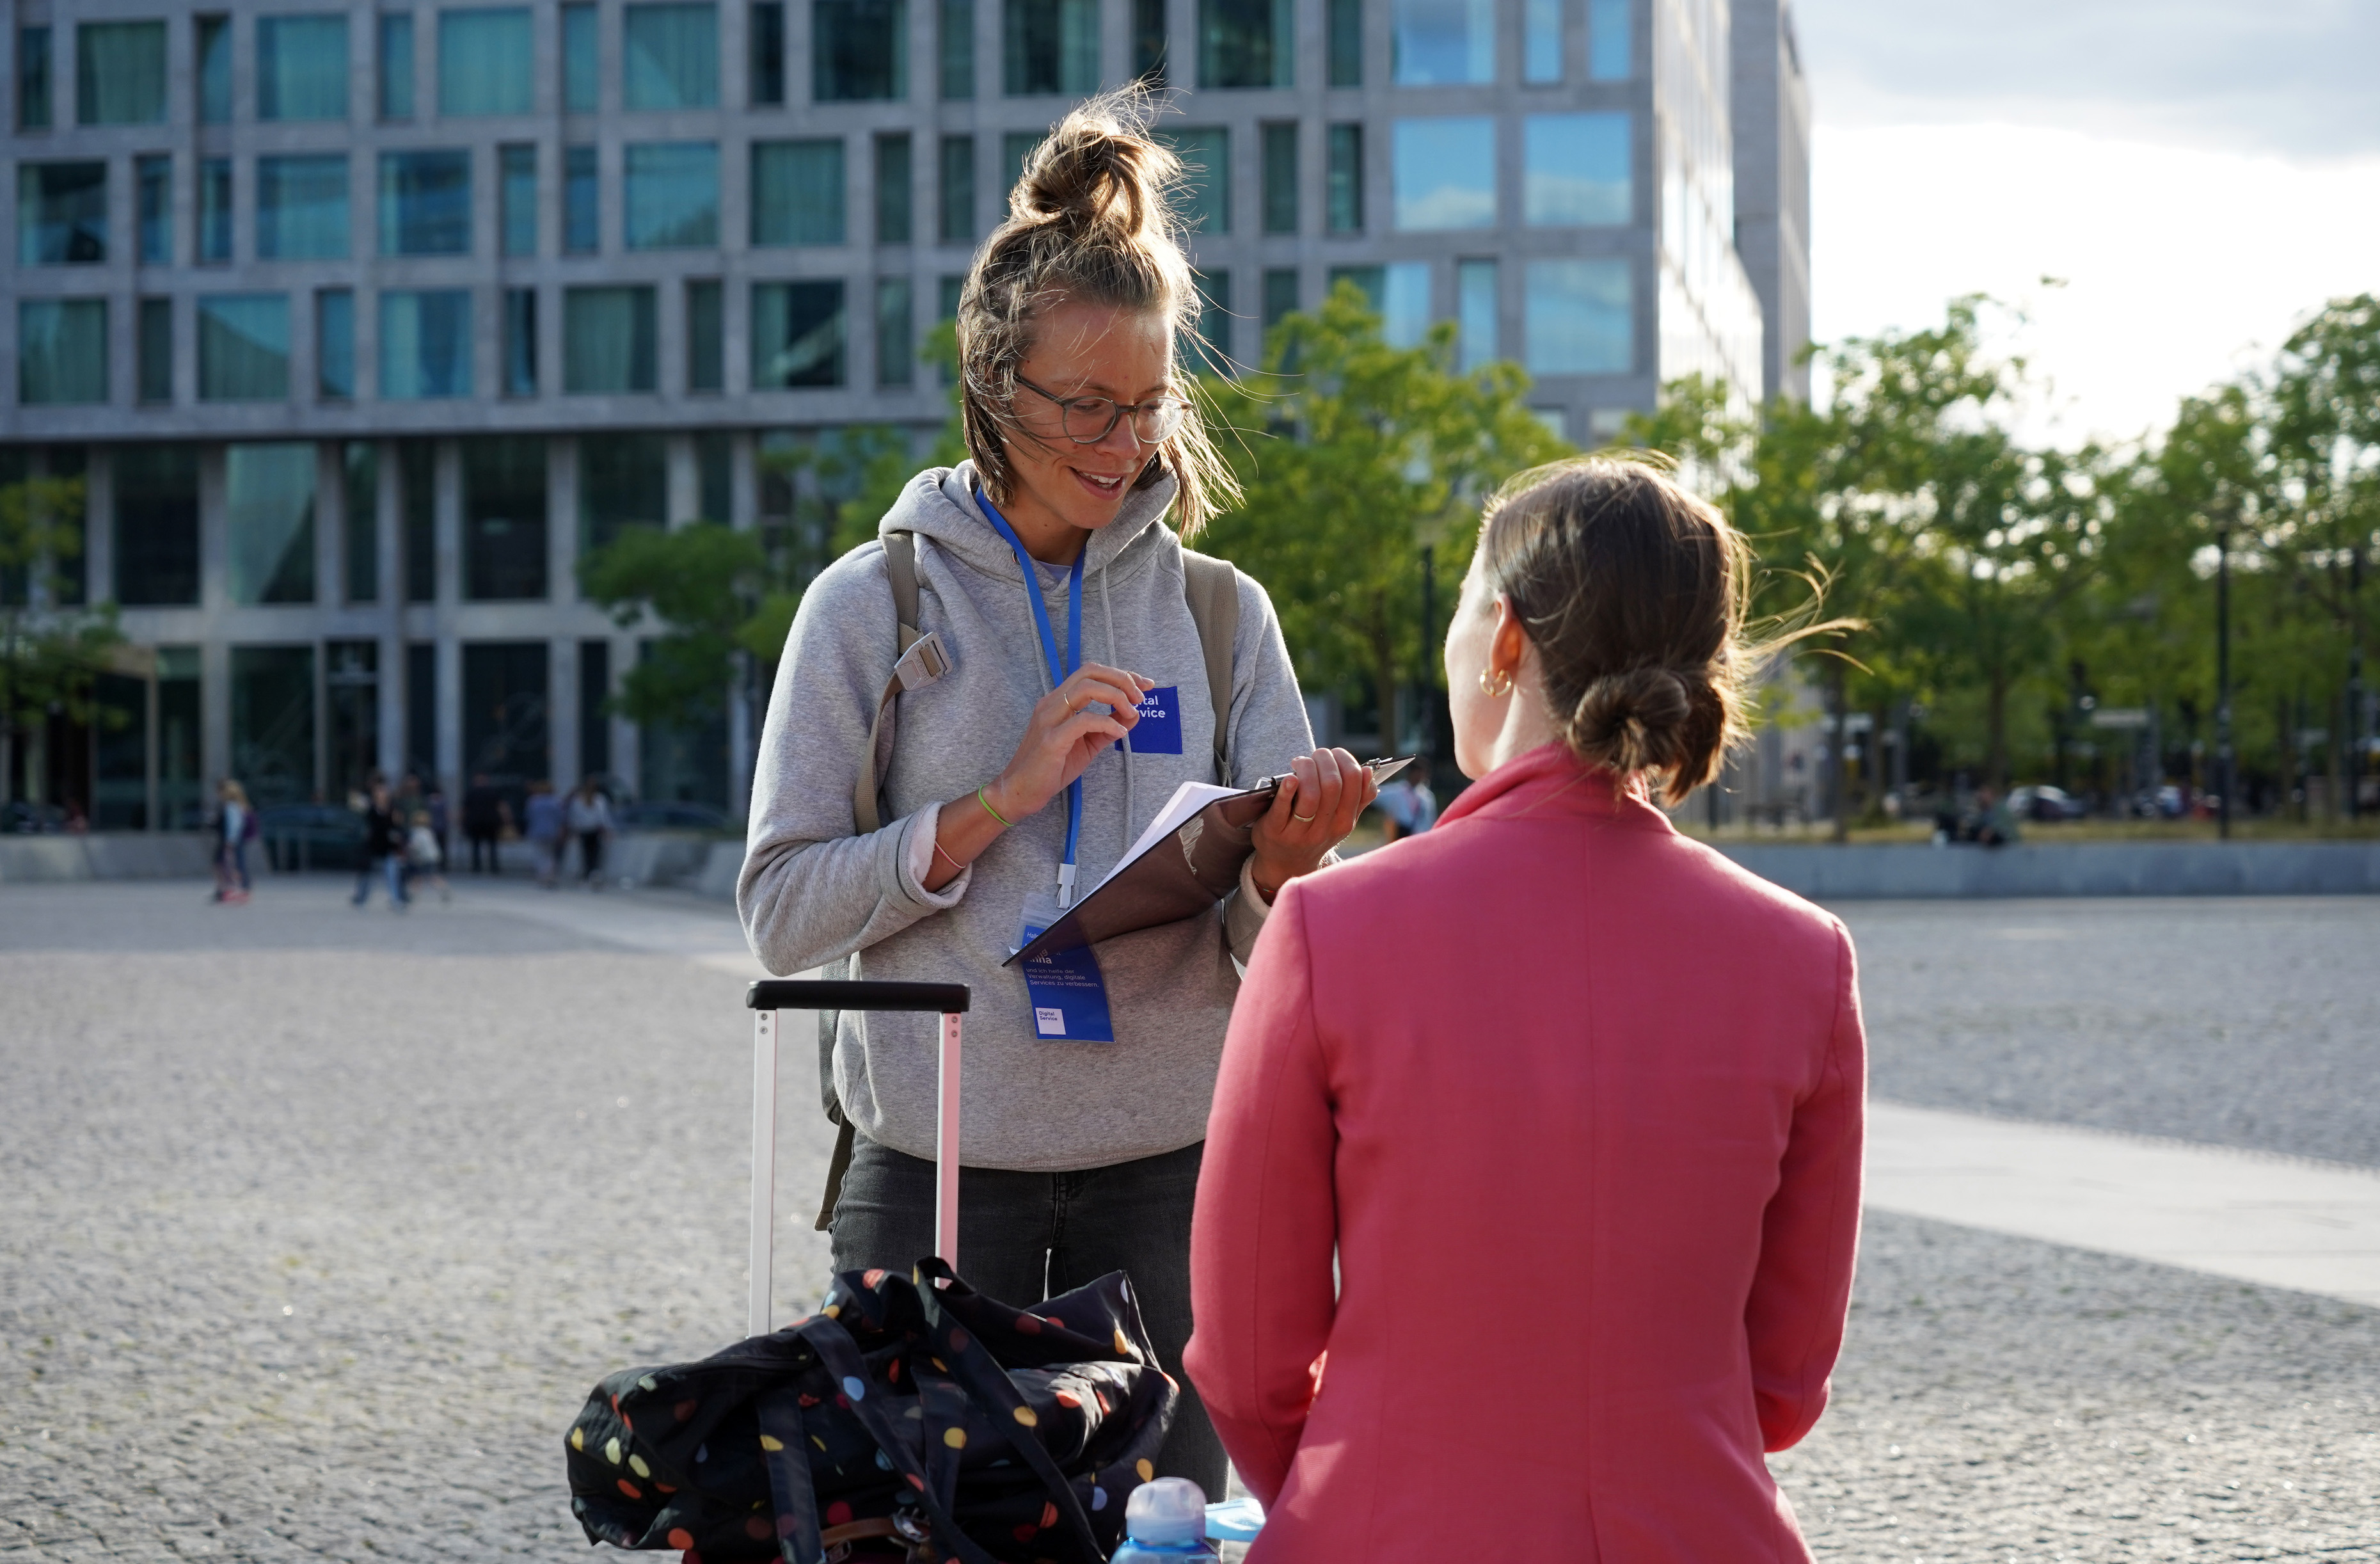 Two young women are talking to each other: one is standing, the other is sitting; the standing woman is holding a clipboard, wearing a hoodie with the DigitalService logo and a blue name tag, the sitting woman is wearing a pink blazer and gold earrings and is looking at them.